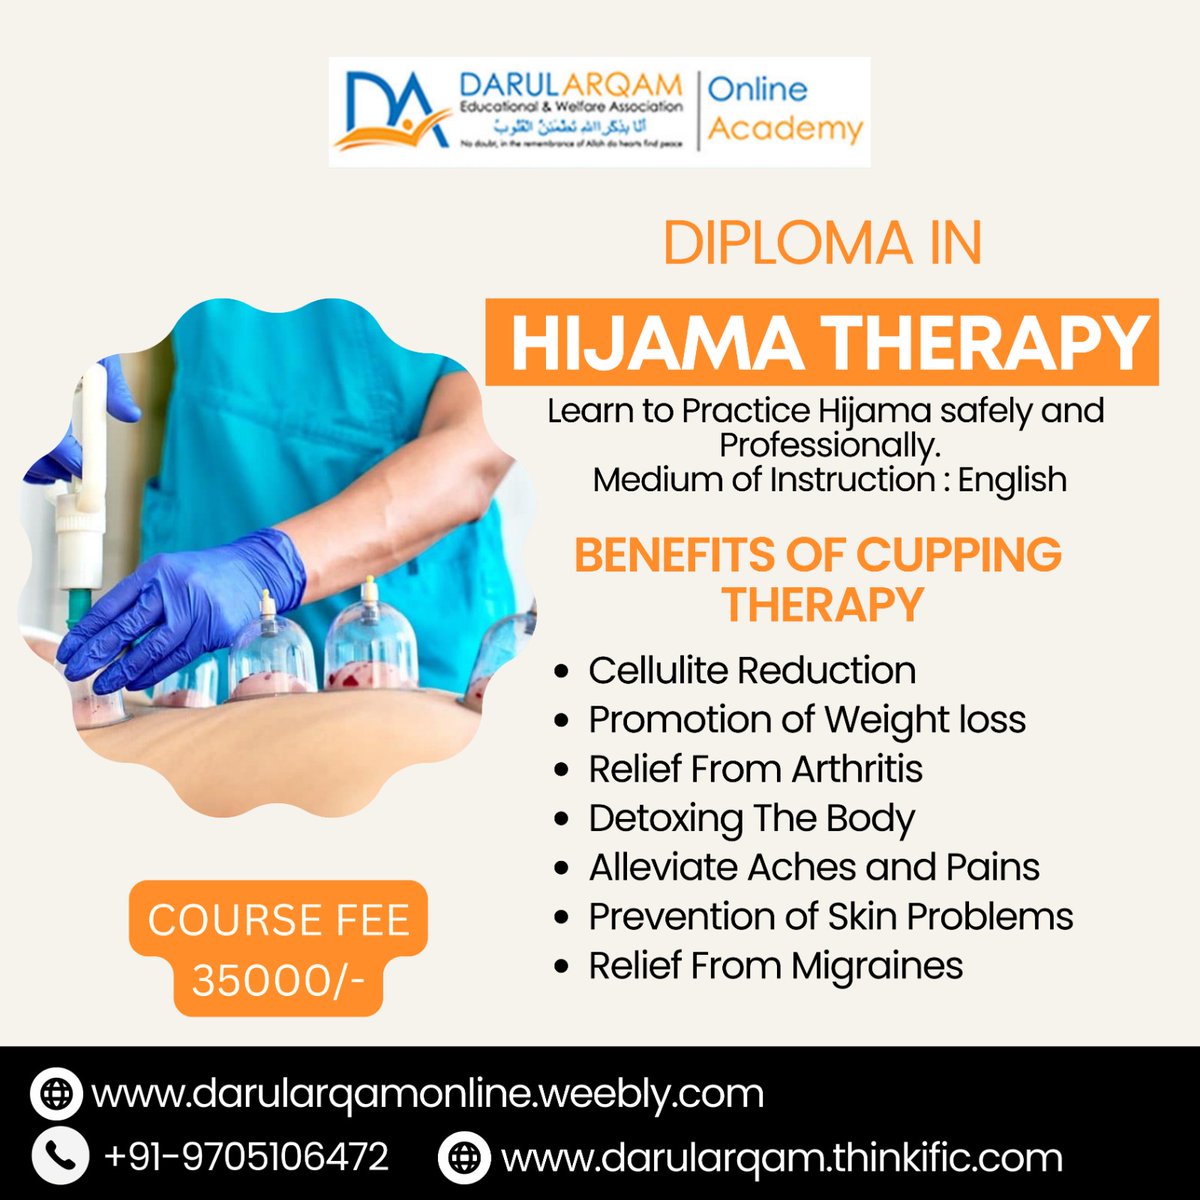 Learn Hijama Therapy Courses with Darul Arqam specialists. Get Educated by the most experienced & certified instructors on everything in detail.

Enroll Now!!
Link - darularqamonline.com
Contact No - +91-9705106472

#Darularqam #Islamicstudies #OnlineCourse...